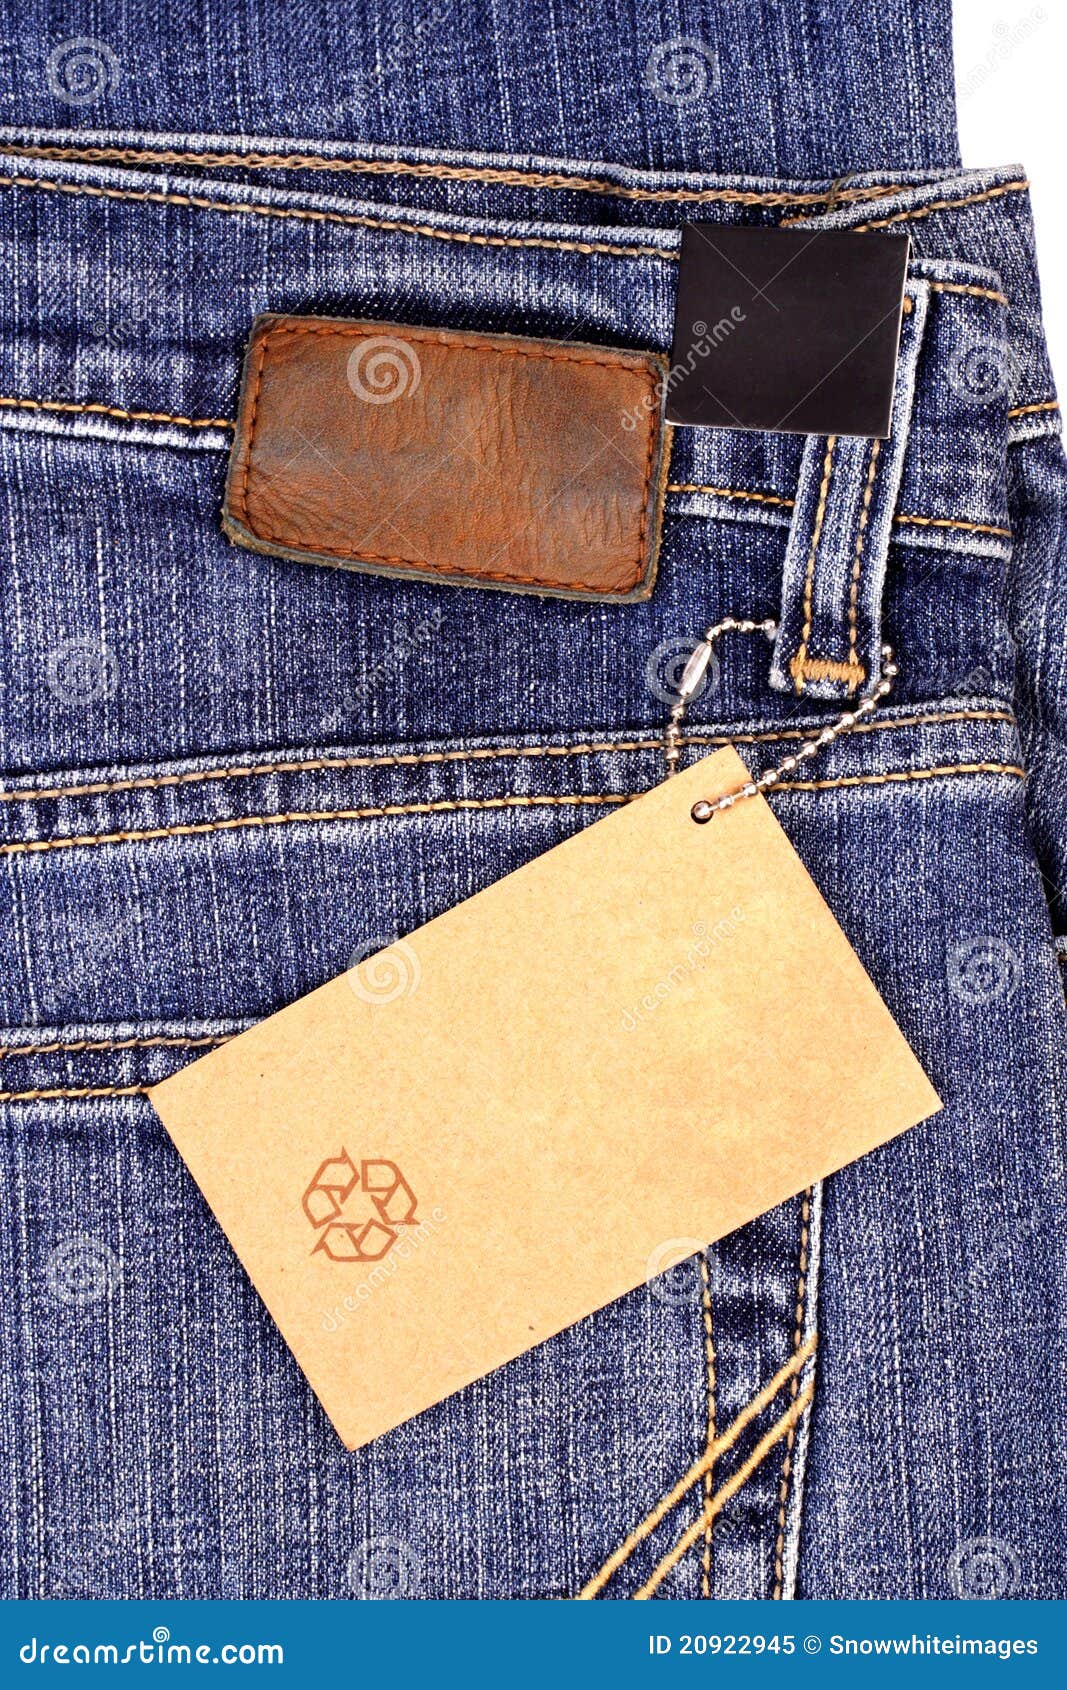 Price tag with blue denim stock image. Image of jacket - 20922945